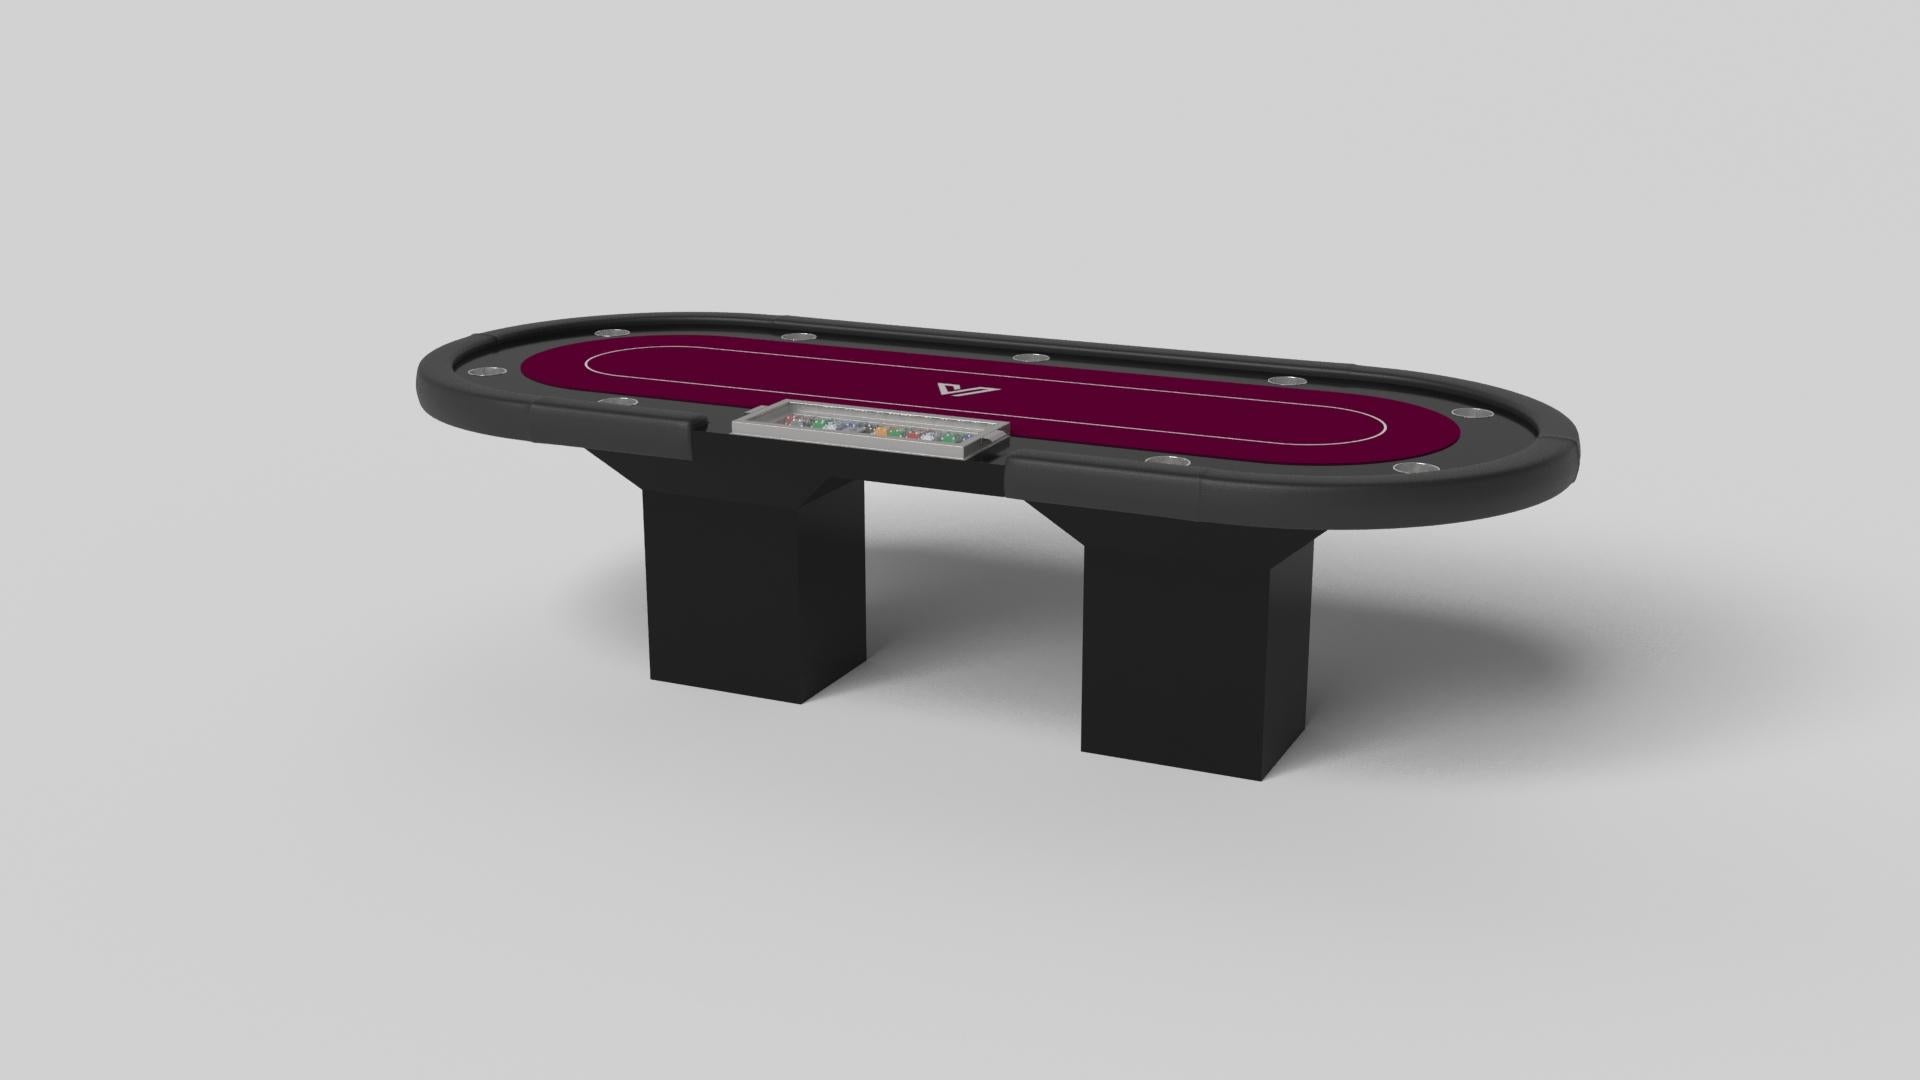 Minimalist design meets opulent elegance in the Trestle poker table. Detailed with a professional surface for endless game play, this contemporary table is expertly crafted. Square block legs give it a stark, geometric look that contributes to its